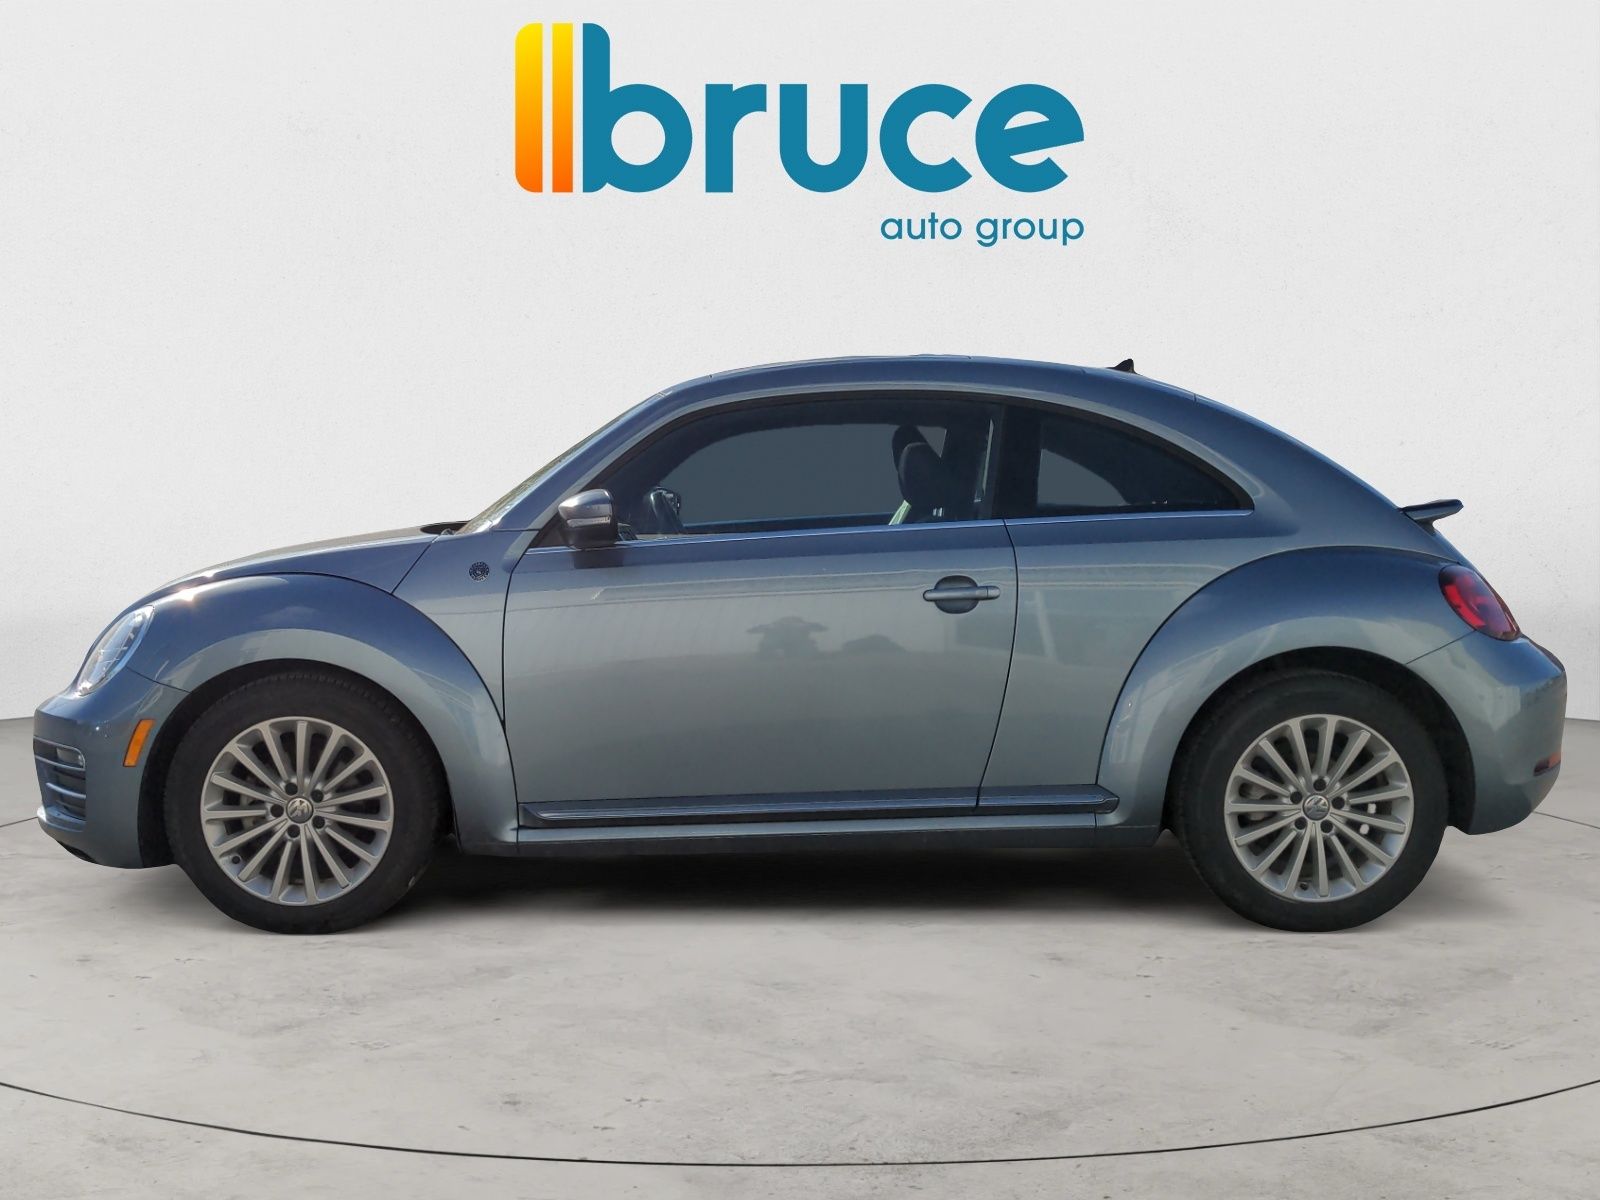 2019 Volkswagen Beetle WOLFSBURG EDITION (RATES STARTING AT 4.99%) 2 YEAR/40K CERTIFIED WARRANTY AVAILABLE, RATES AS LOW AS 4.99%